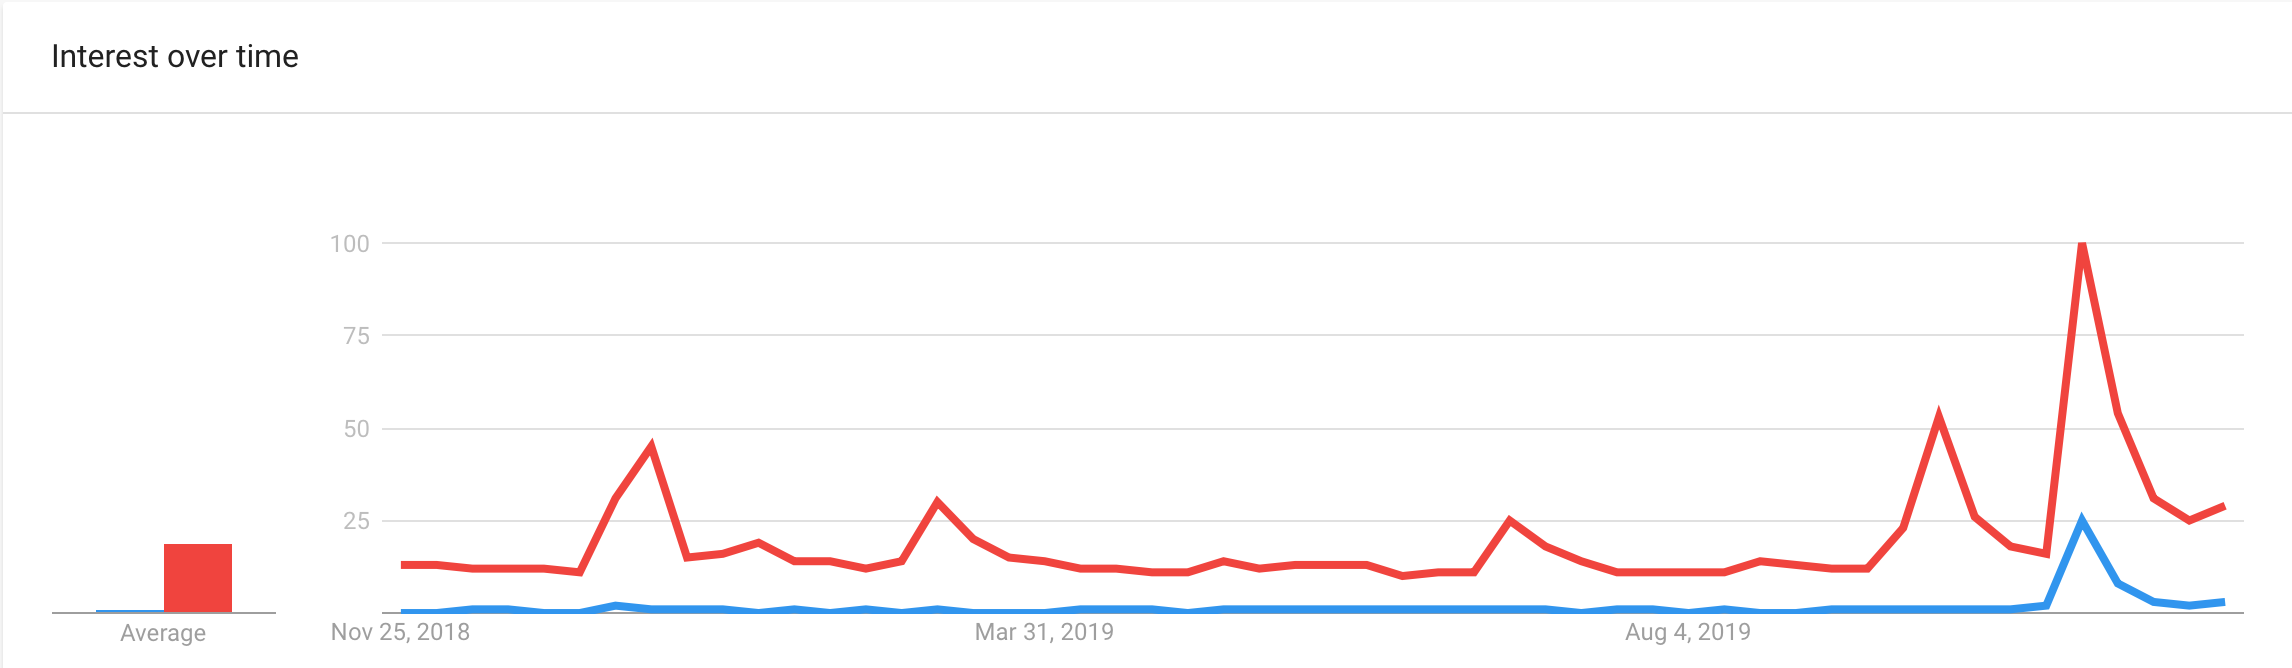 Interest over time.png